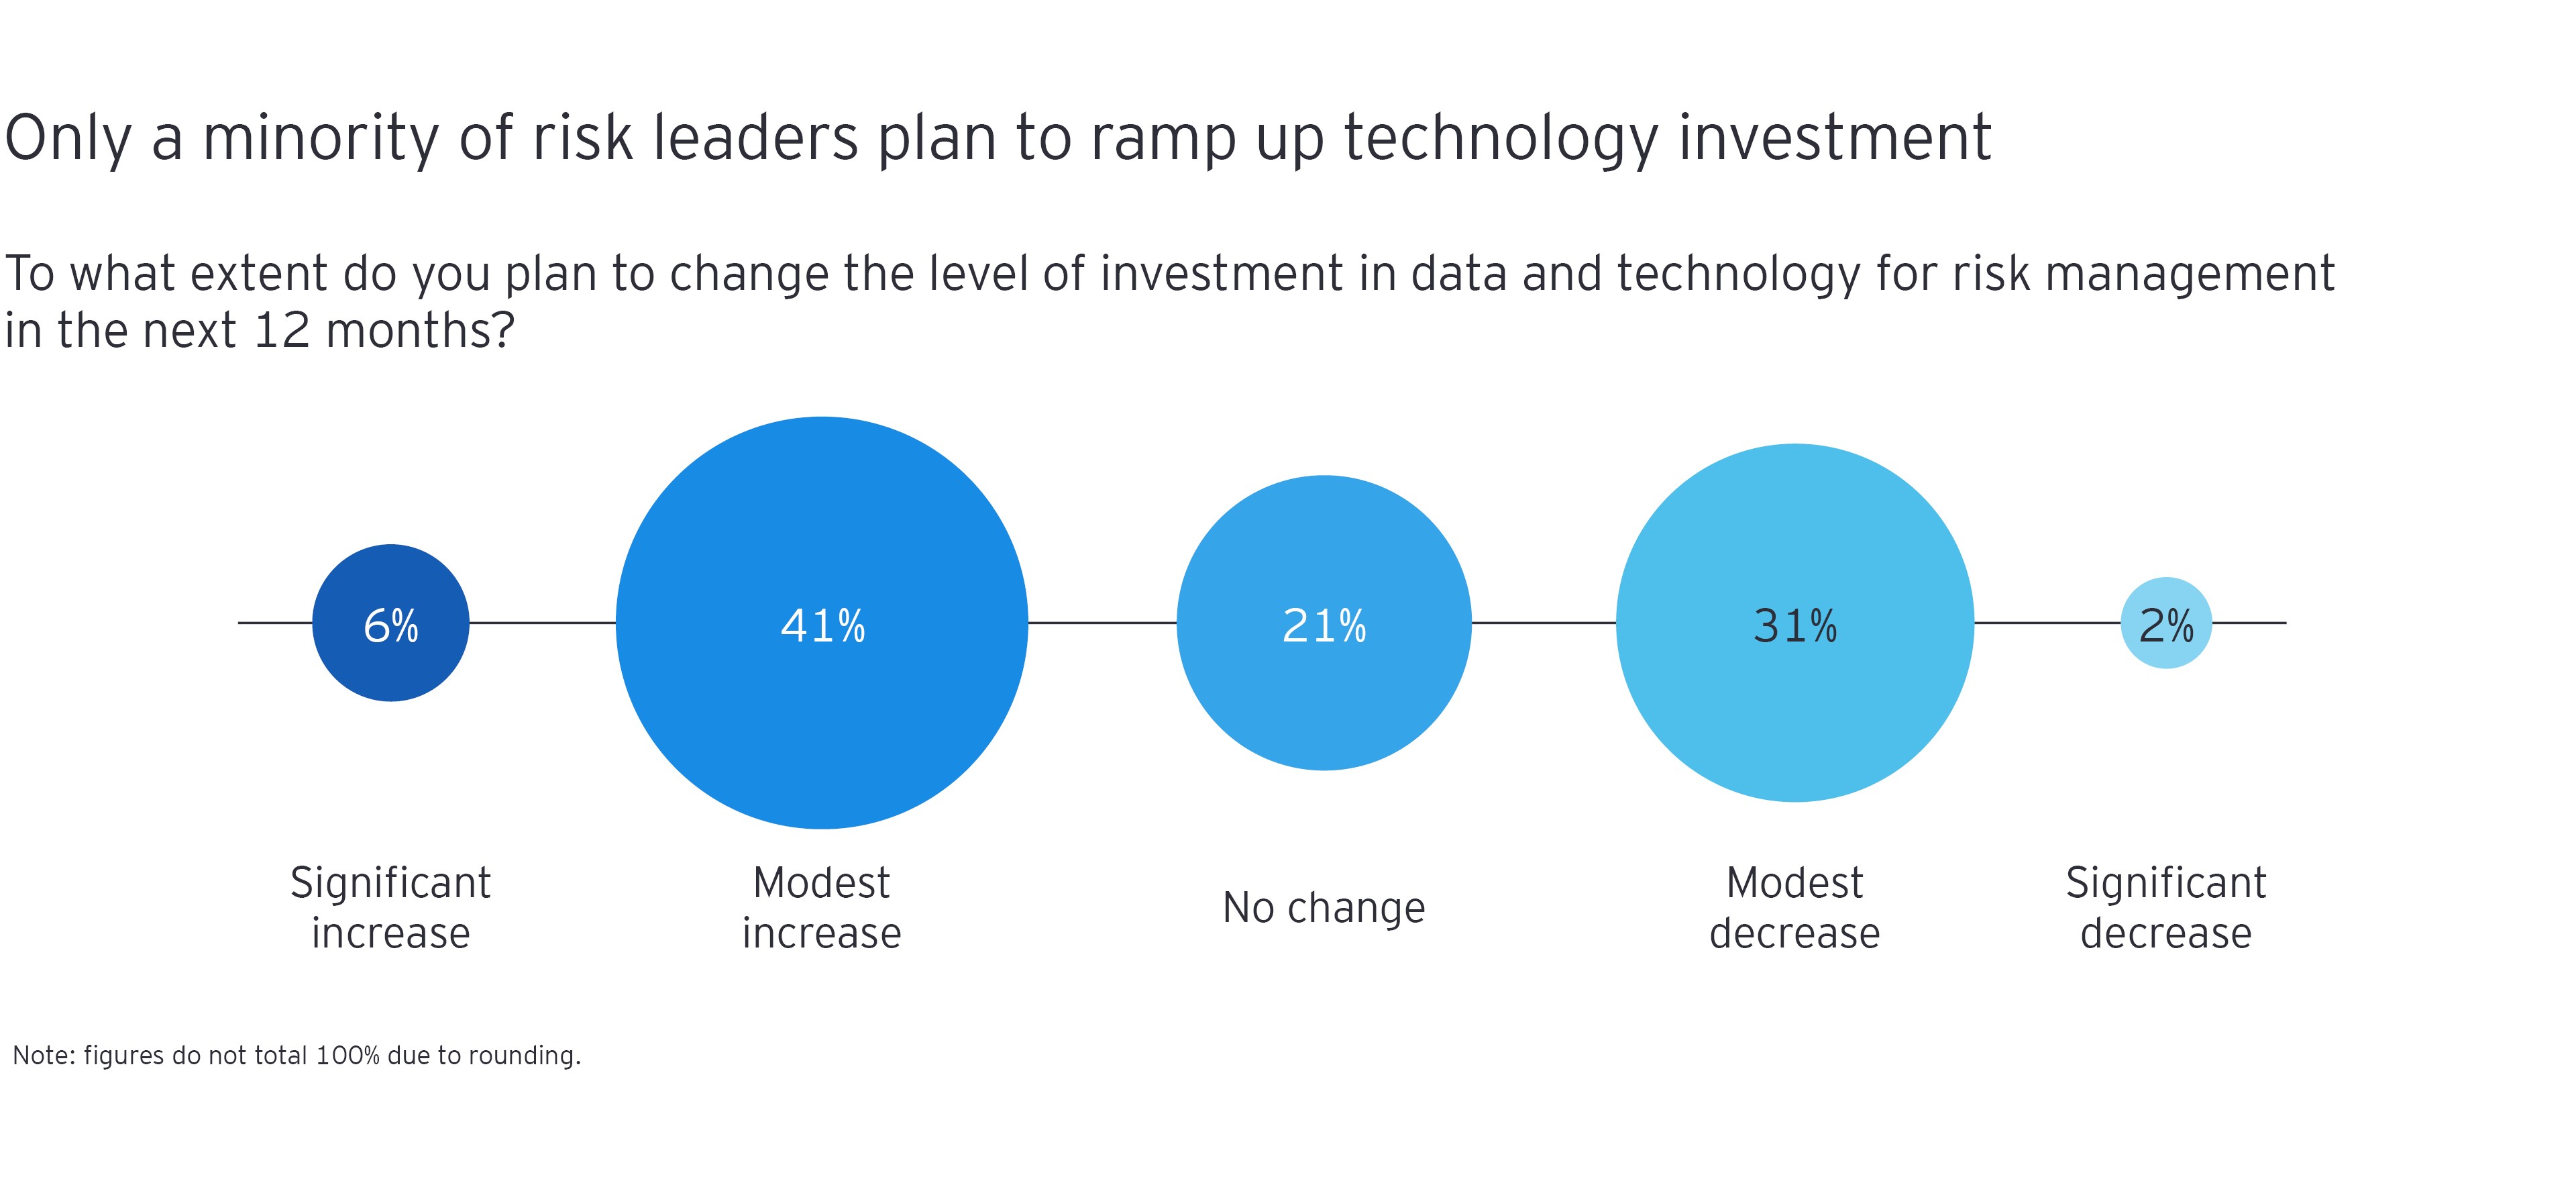 Chart breaking down survey responses by percentage to “To what extent do you plan to change the level of investment in data and technology for risk management in the next 12 months?”